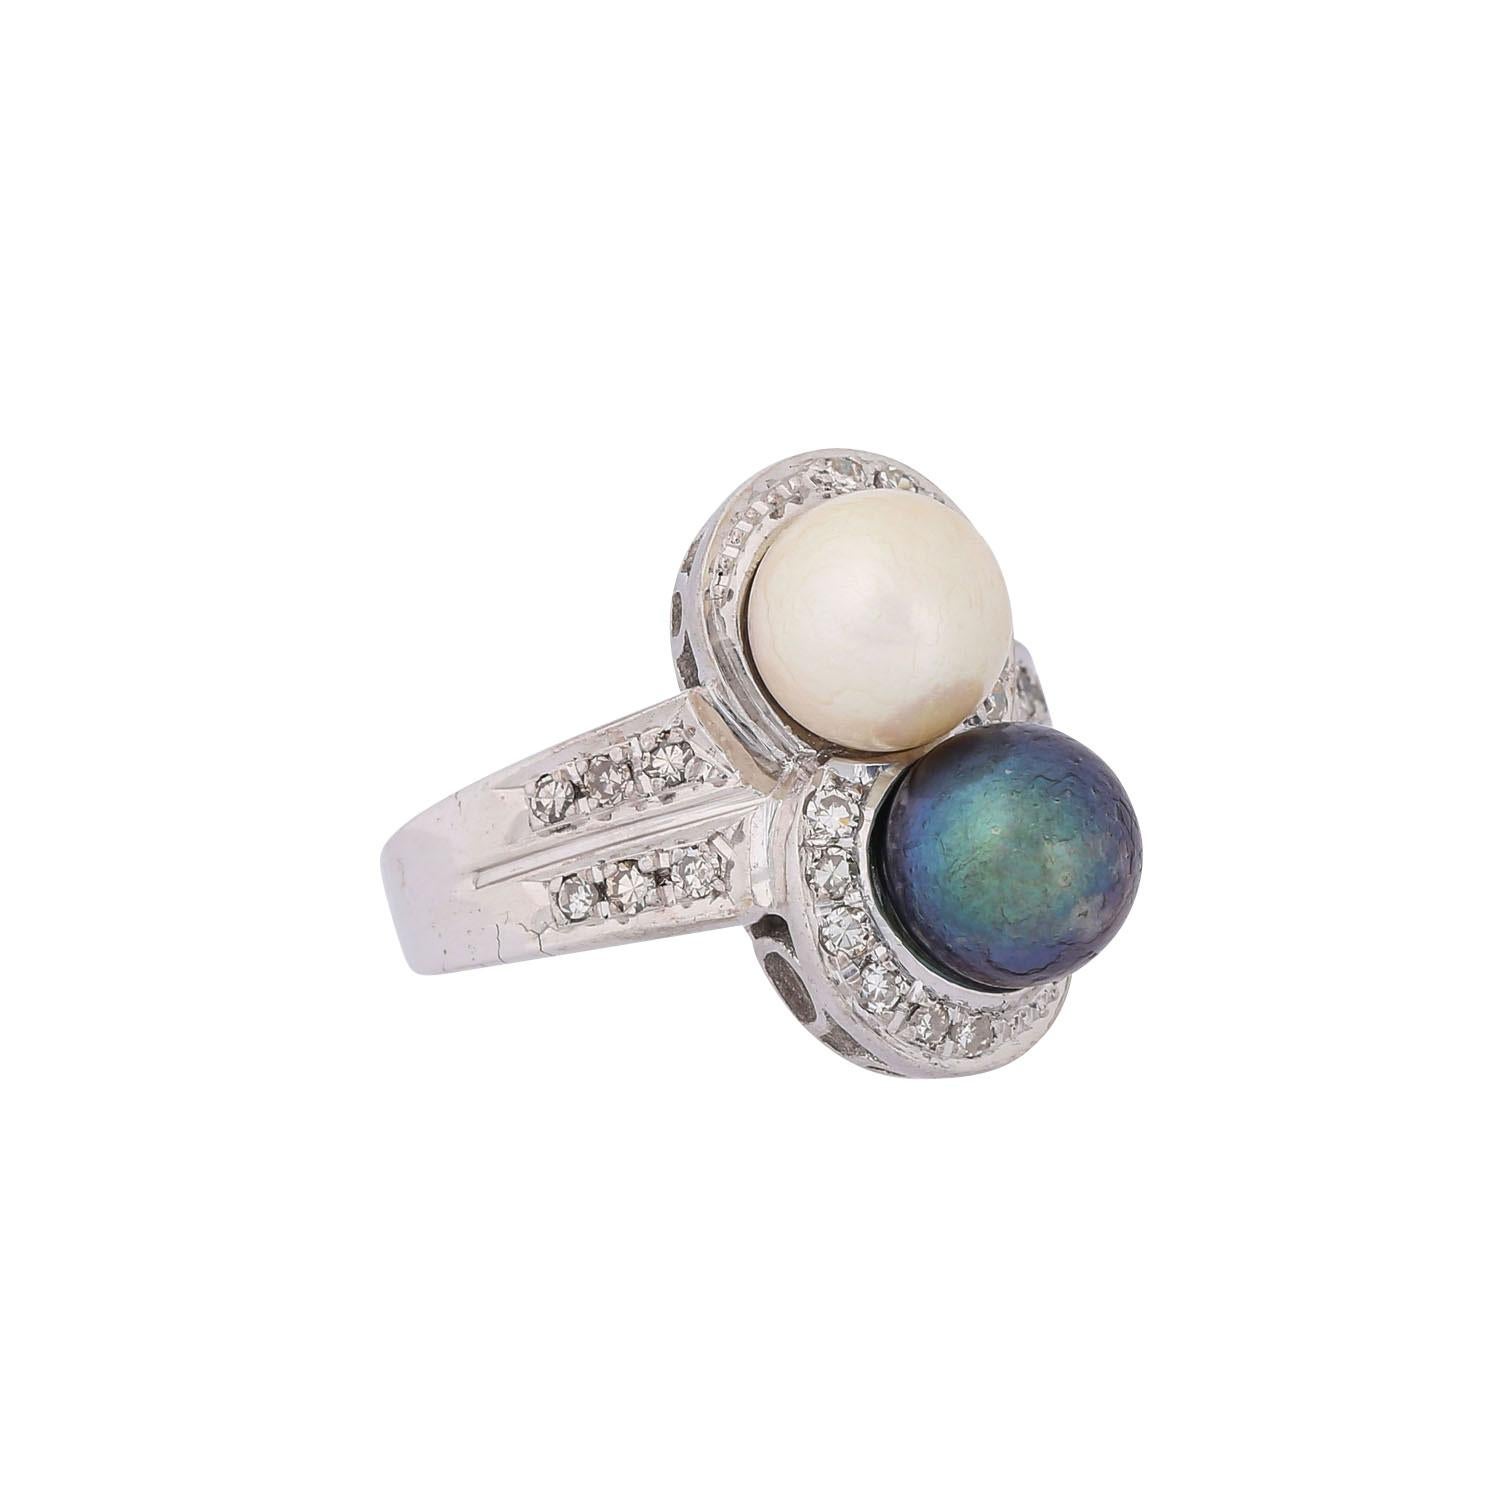 0.22 ct in total, medium color and clarity, Akoya cultured pearls (1 dyed), WG 14K, 10.1 g, RW: 51, 2nd half of the 20th century, slight signs of wear.
